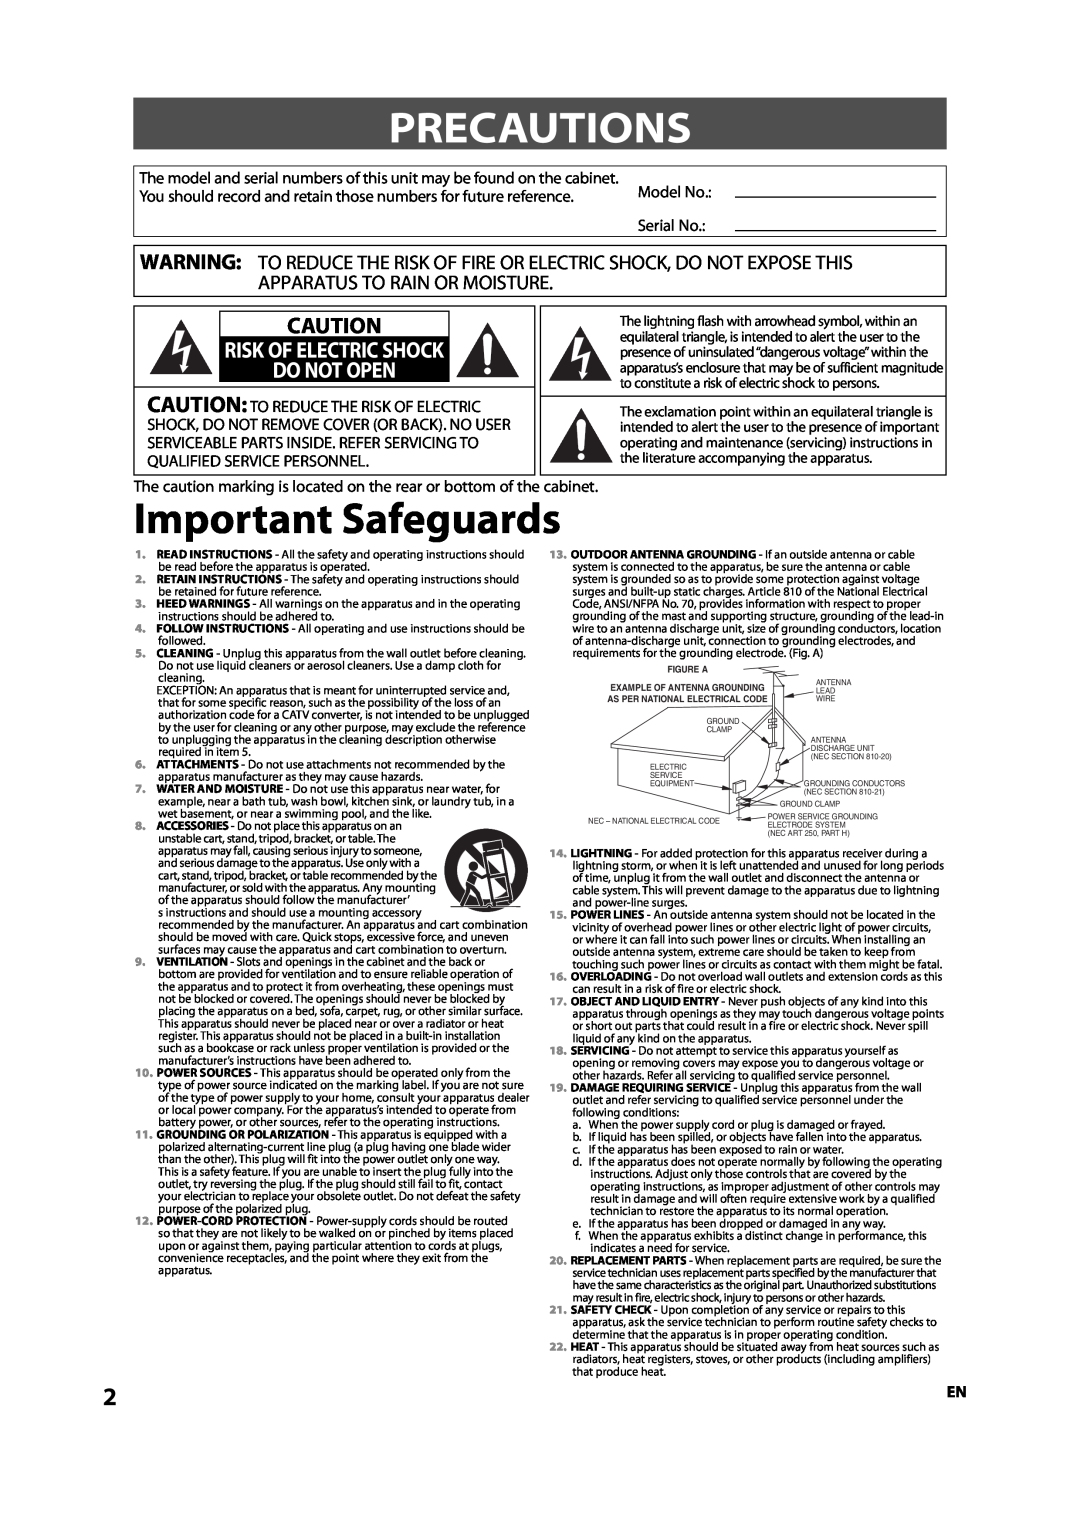 Sylvania NB500SL9 owner manual Precautions, Important Safeguards, Do Not Open, Risk Of Electric Shock 